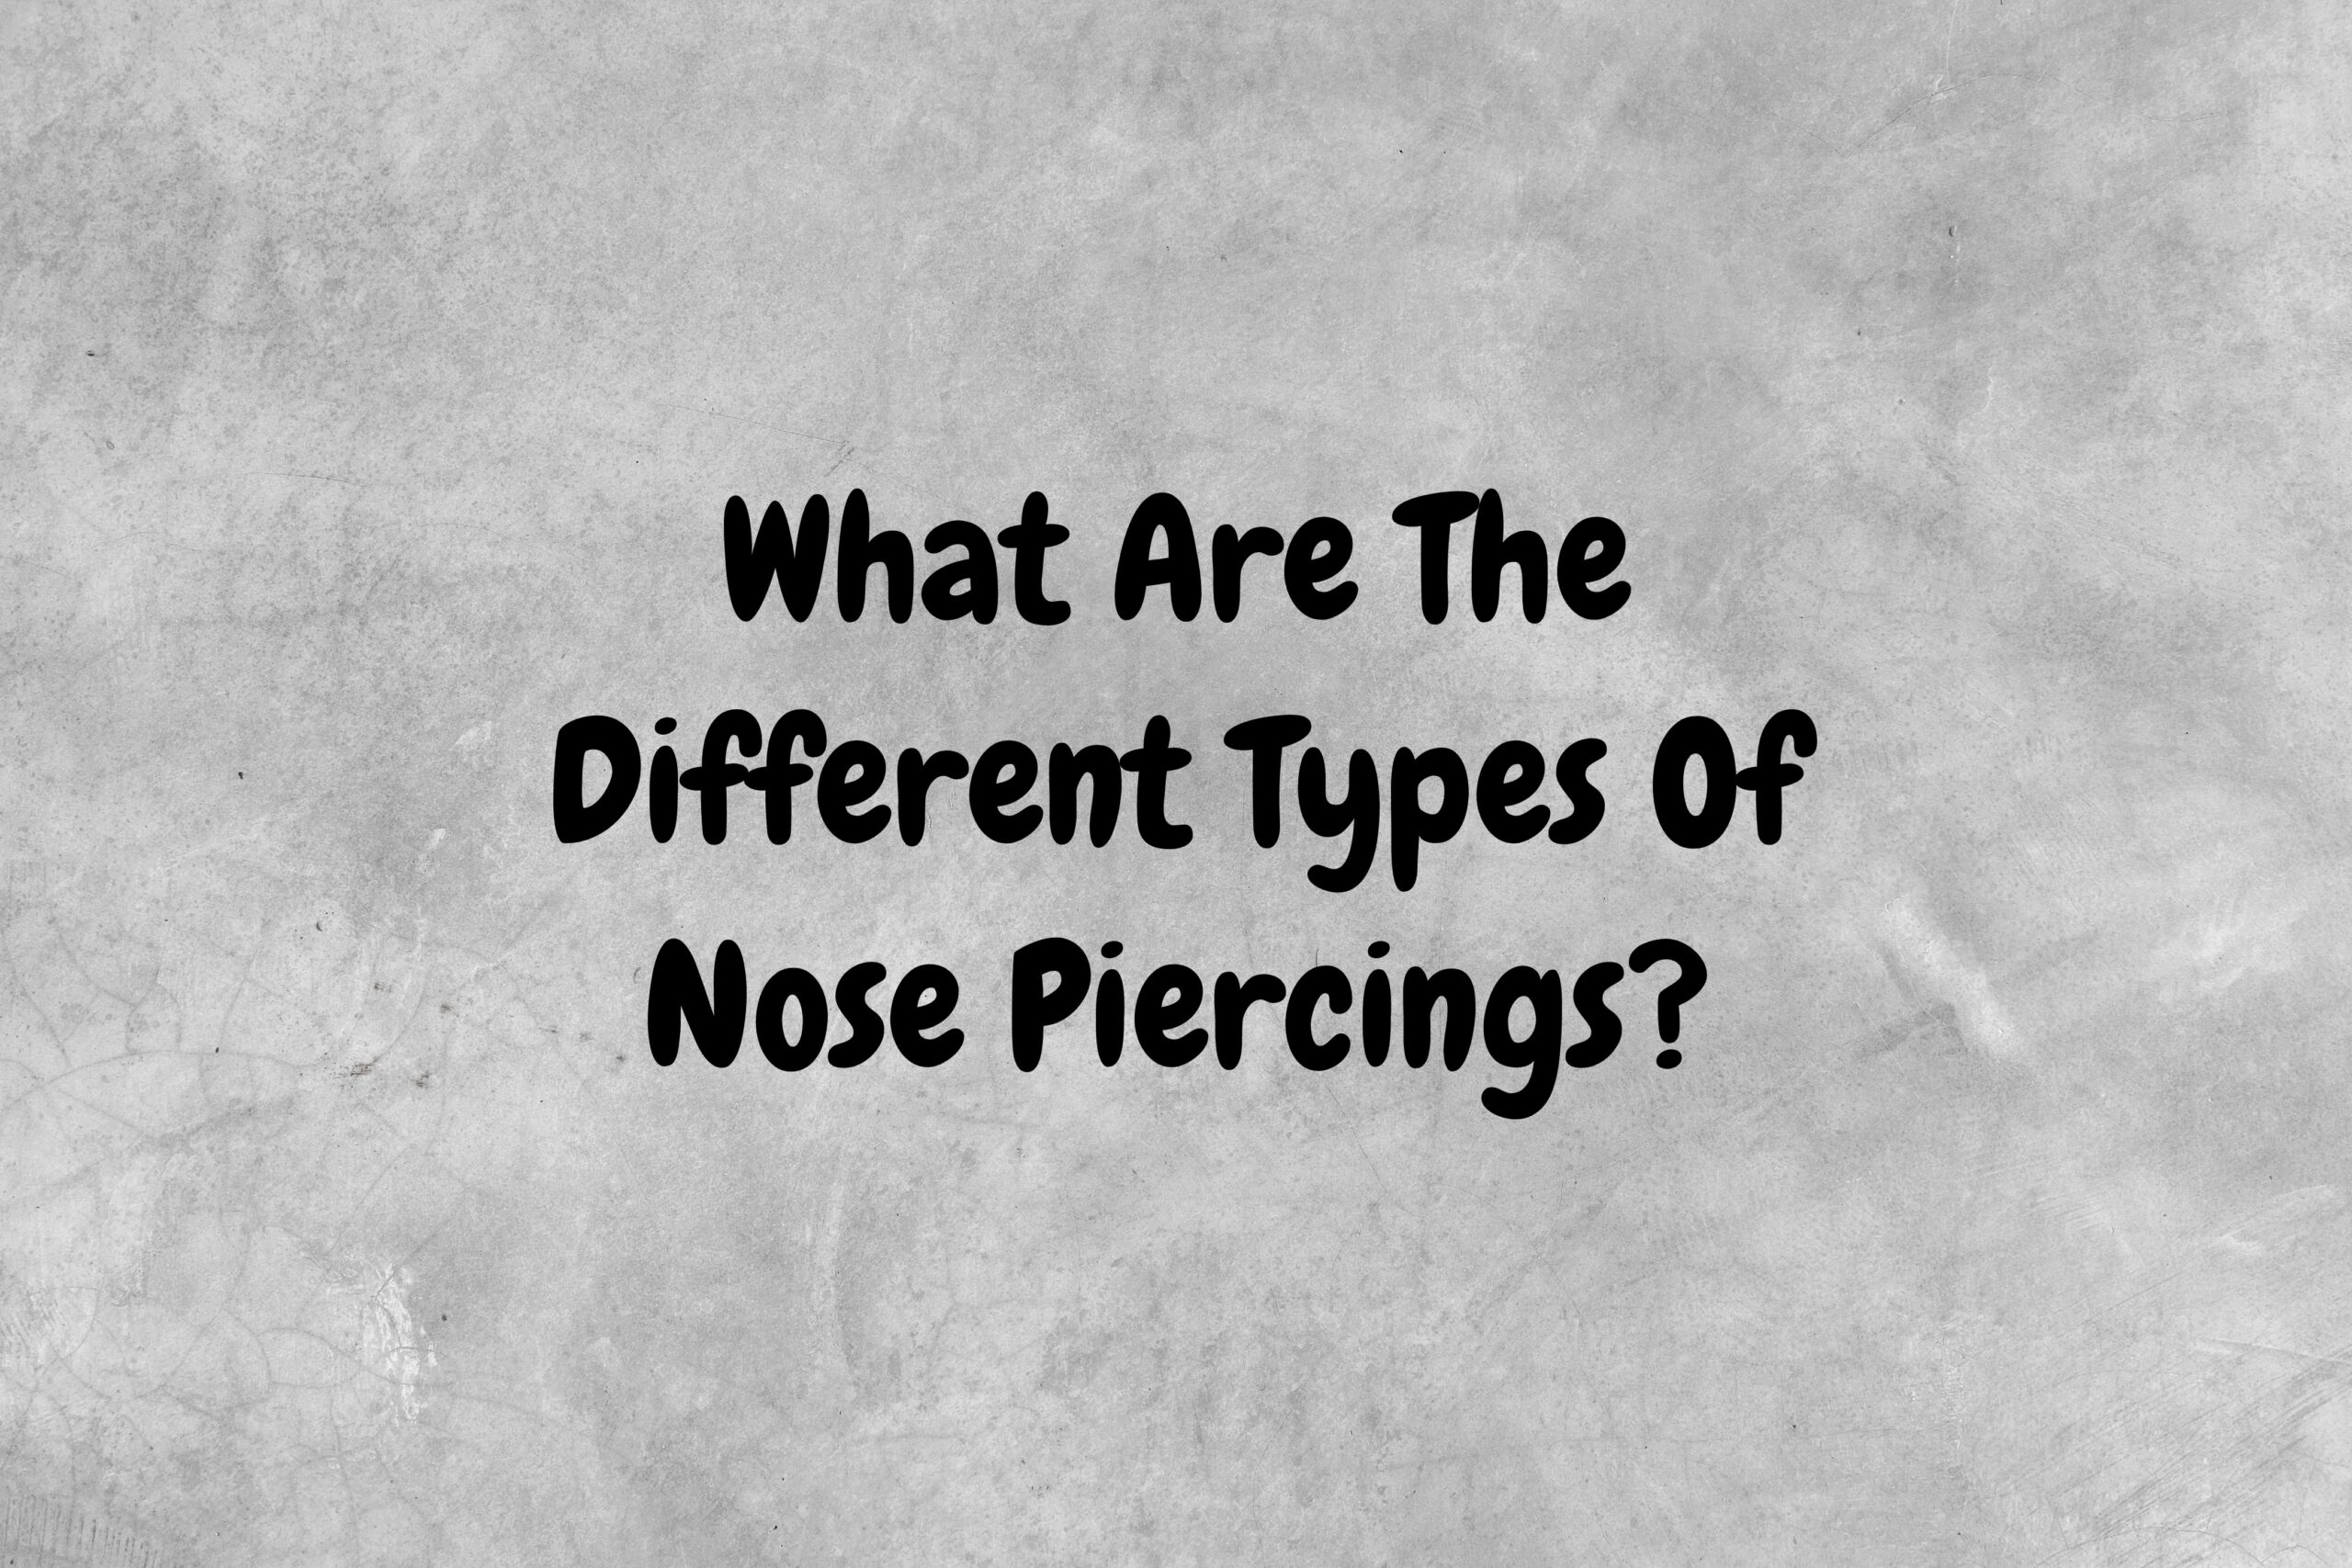 What Are The Different Types Of Nose Piercings?